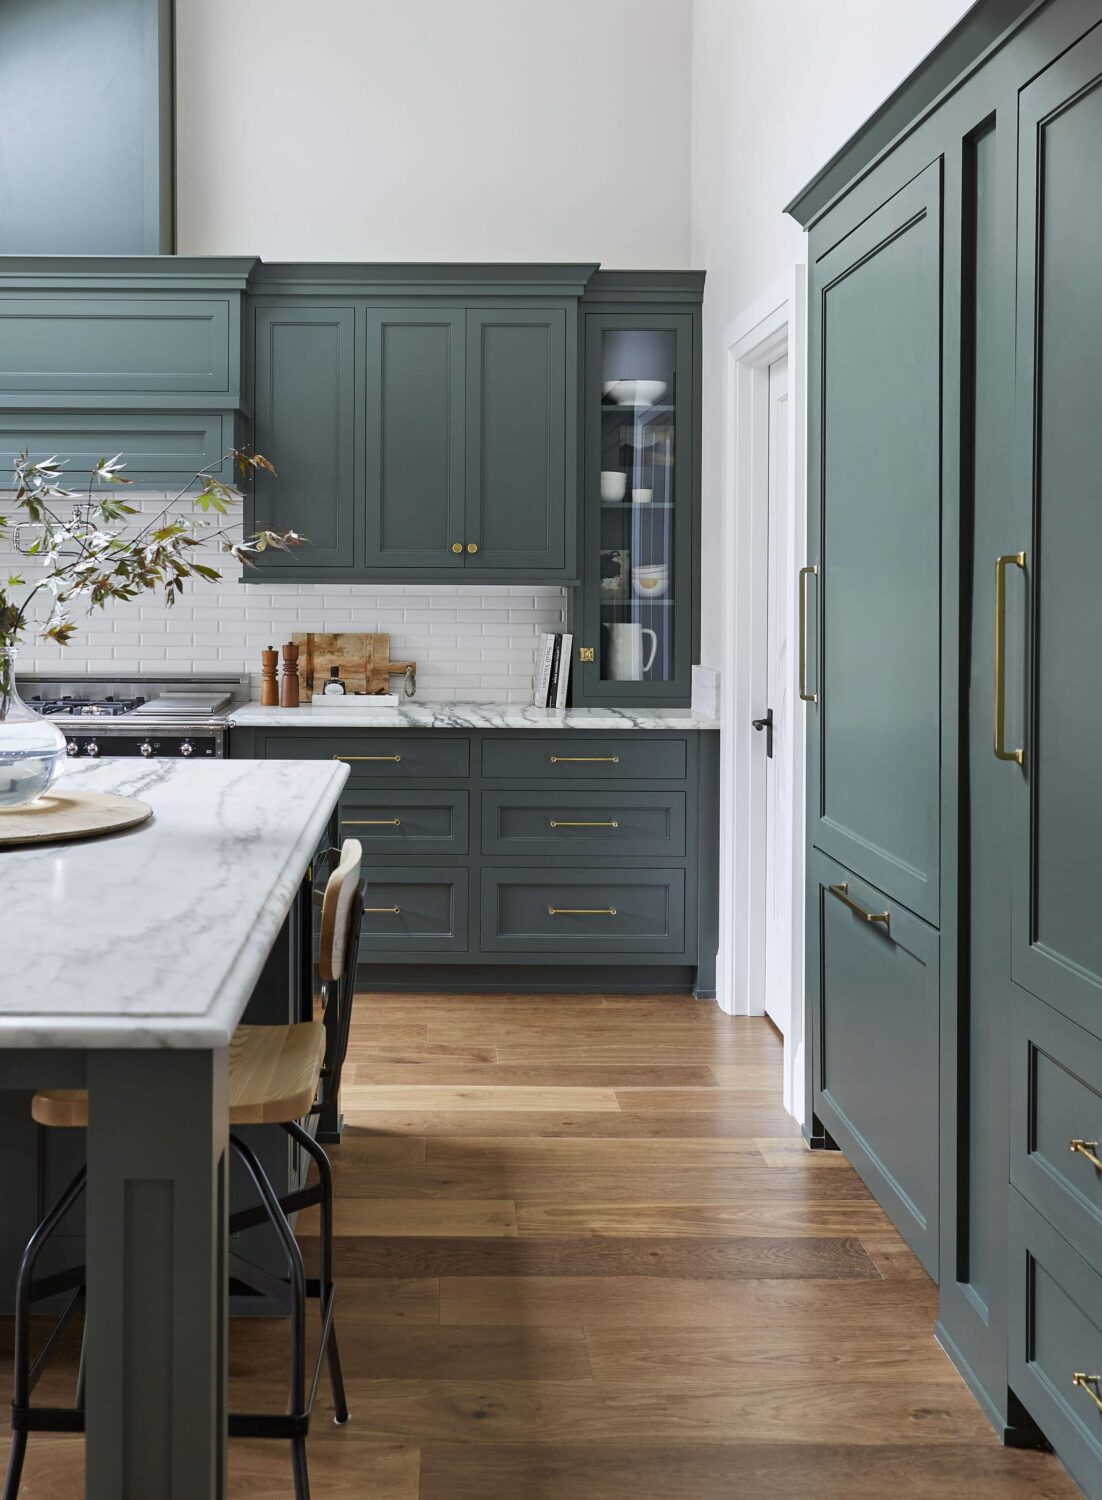 muted-teal-kitchen-cabinets-emily-henderson-nordroom